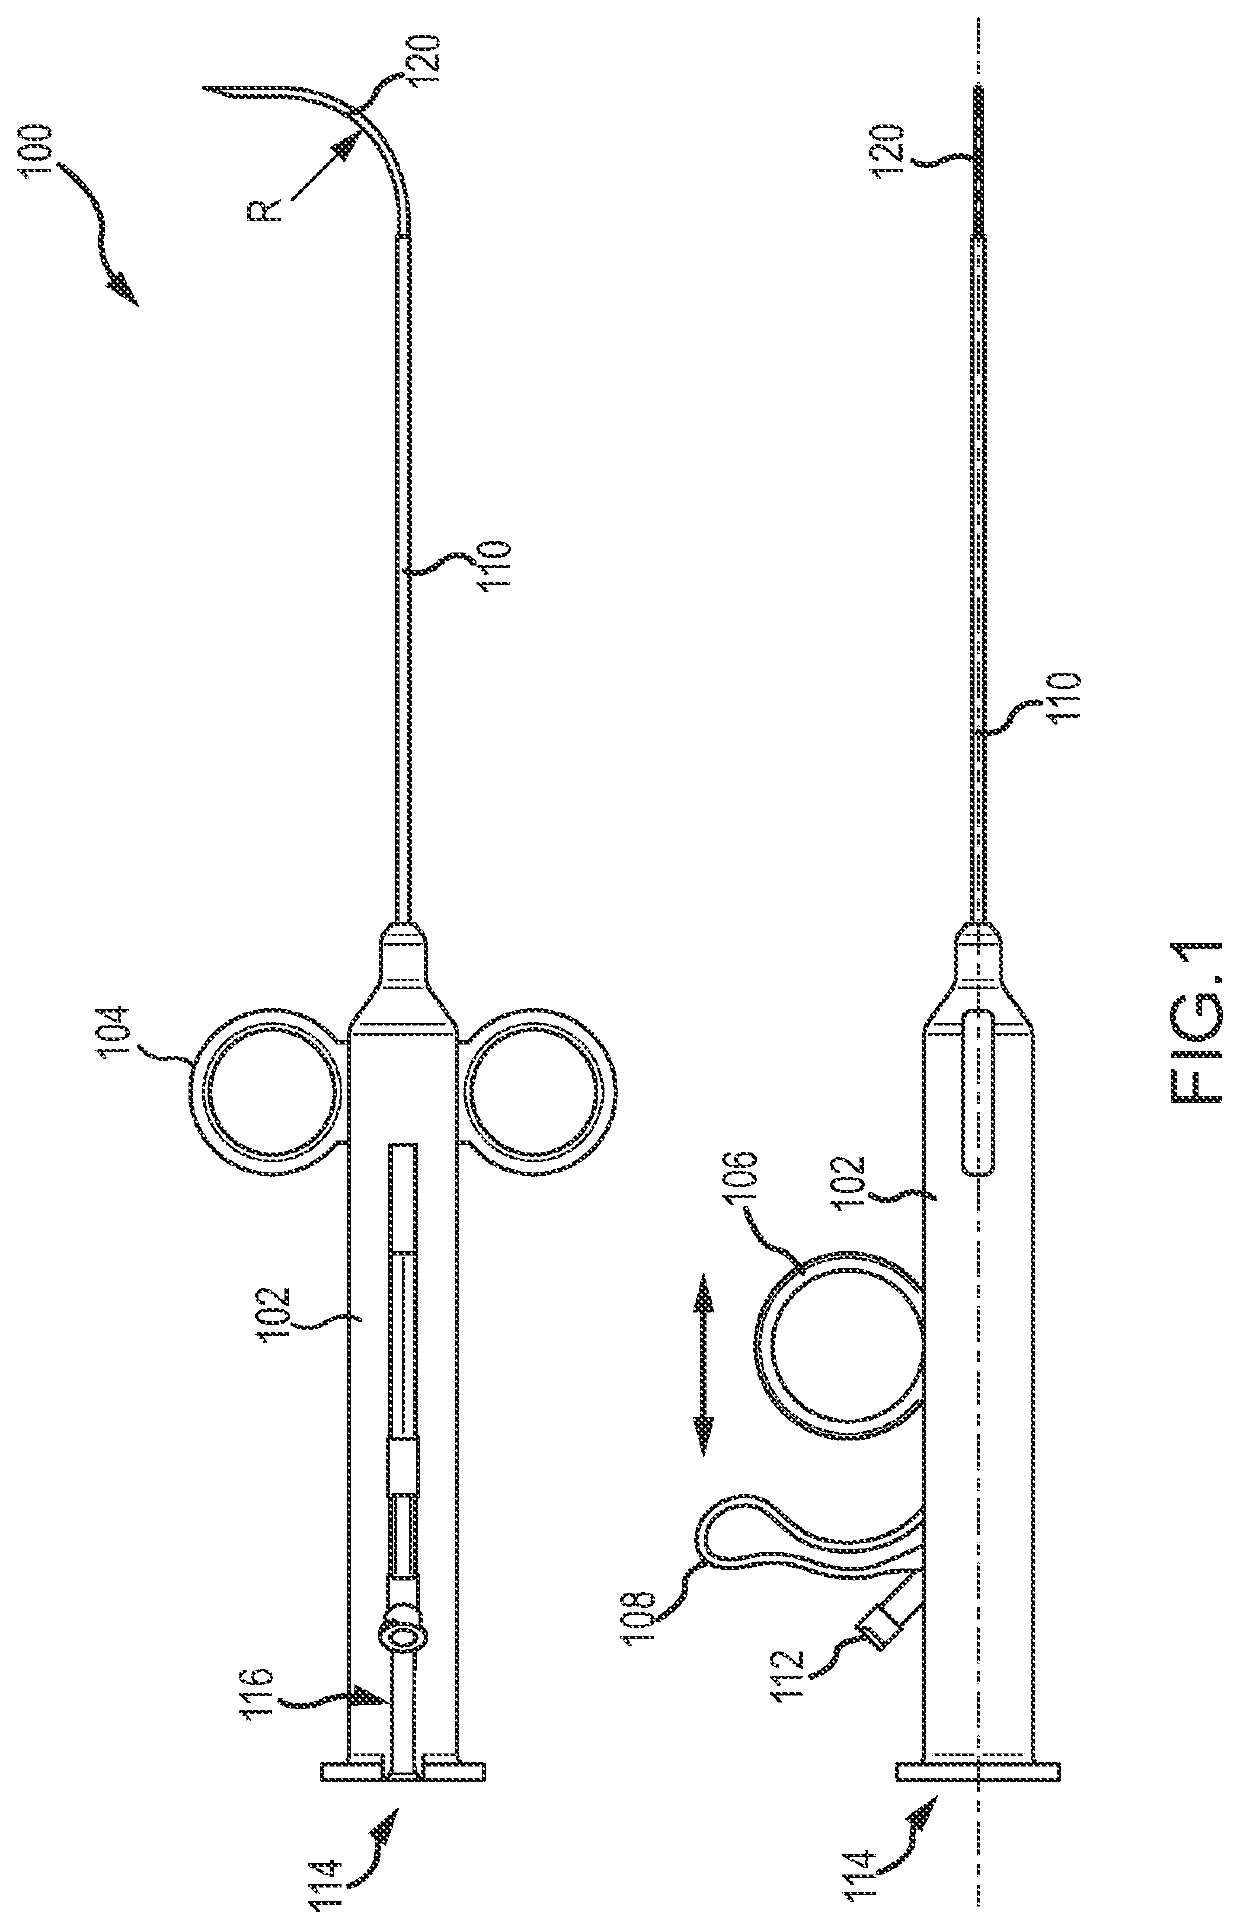 Heart anchor positioning devices, methods, and systems for treatment of congestive heart failure and other conditions